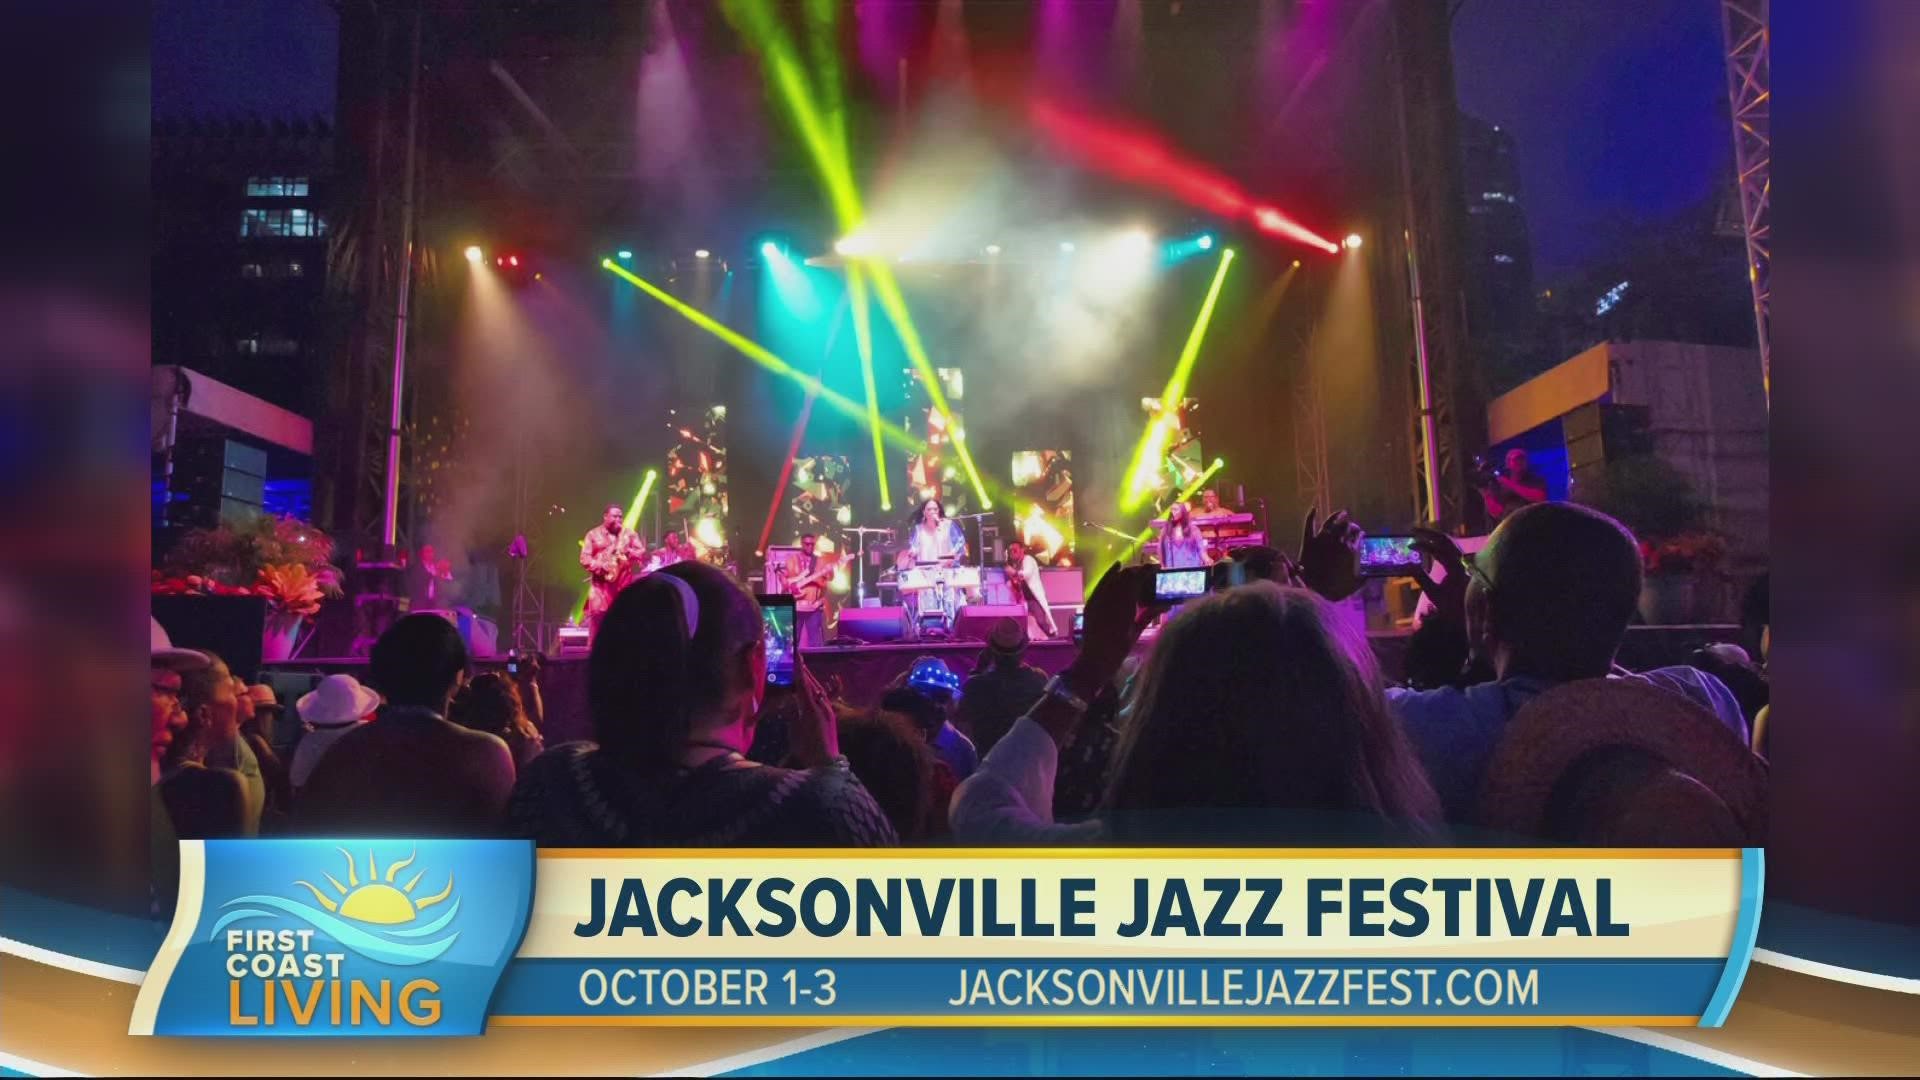 The festival kicks off with the Jacksonville Jazz Piano Competition Sept. 29 at the Florida Theatre, and continues October 1-3.